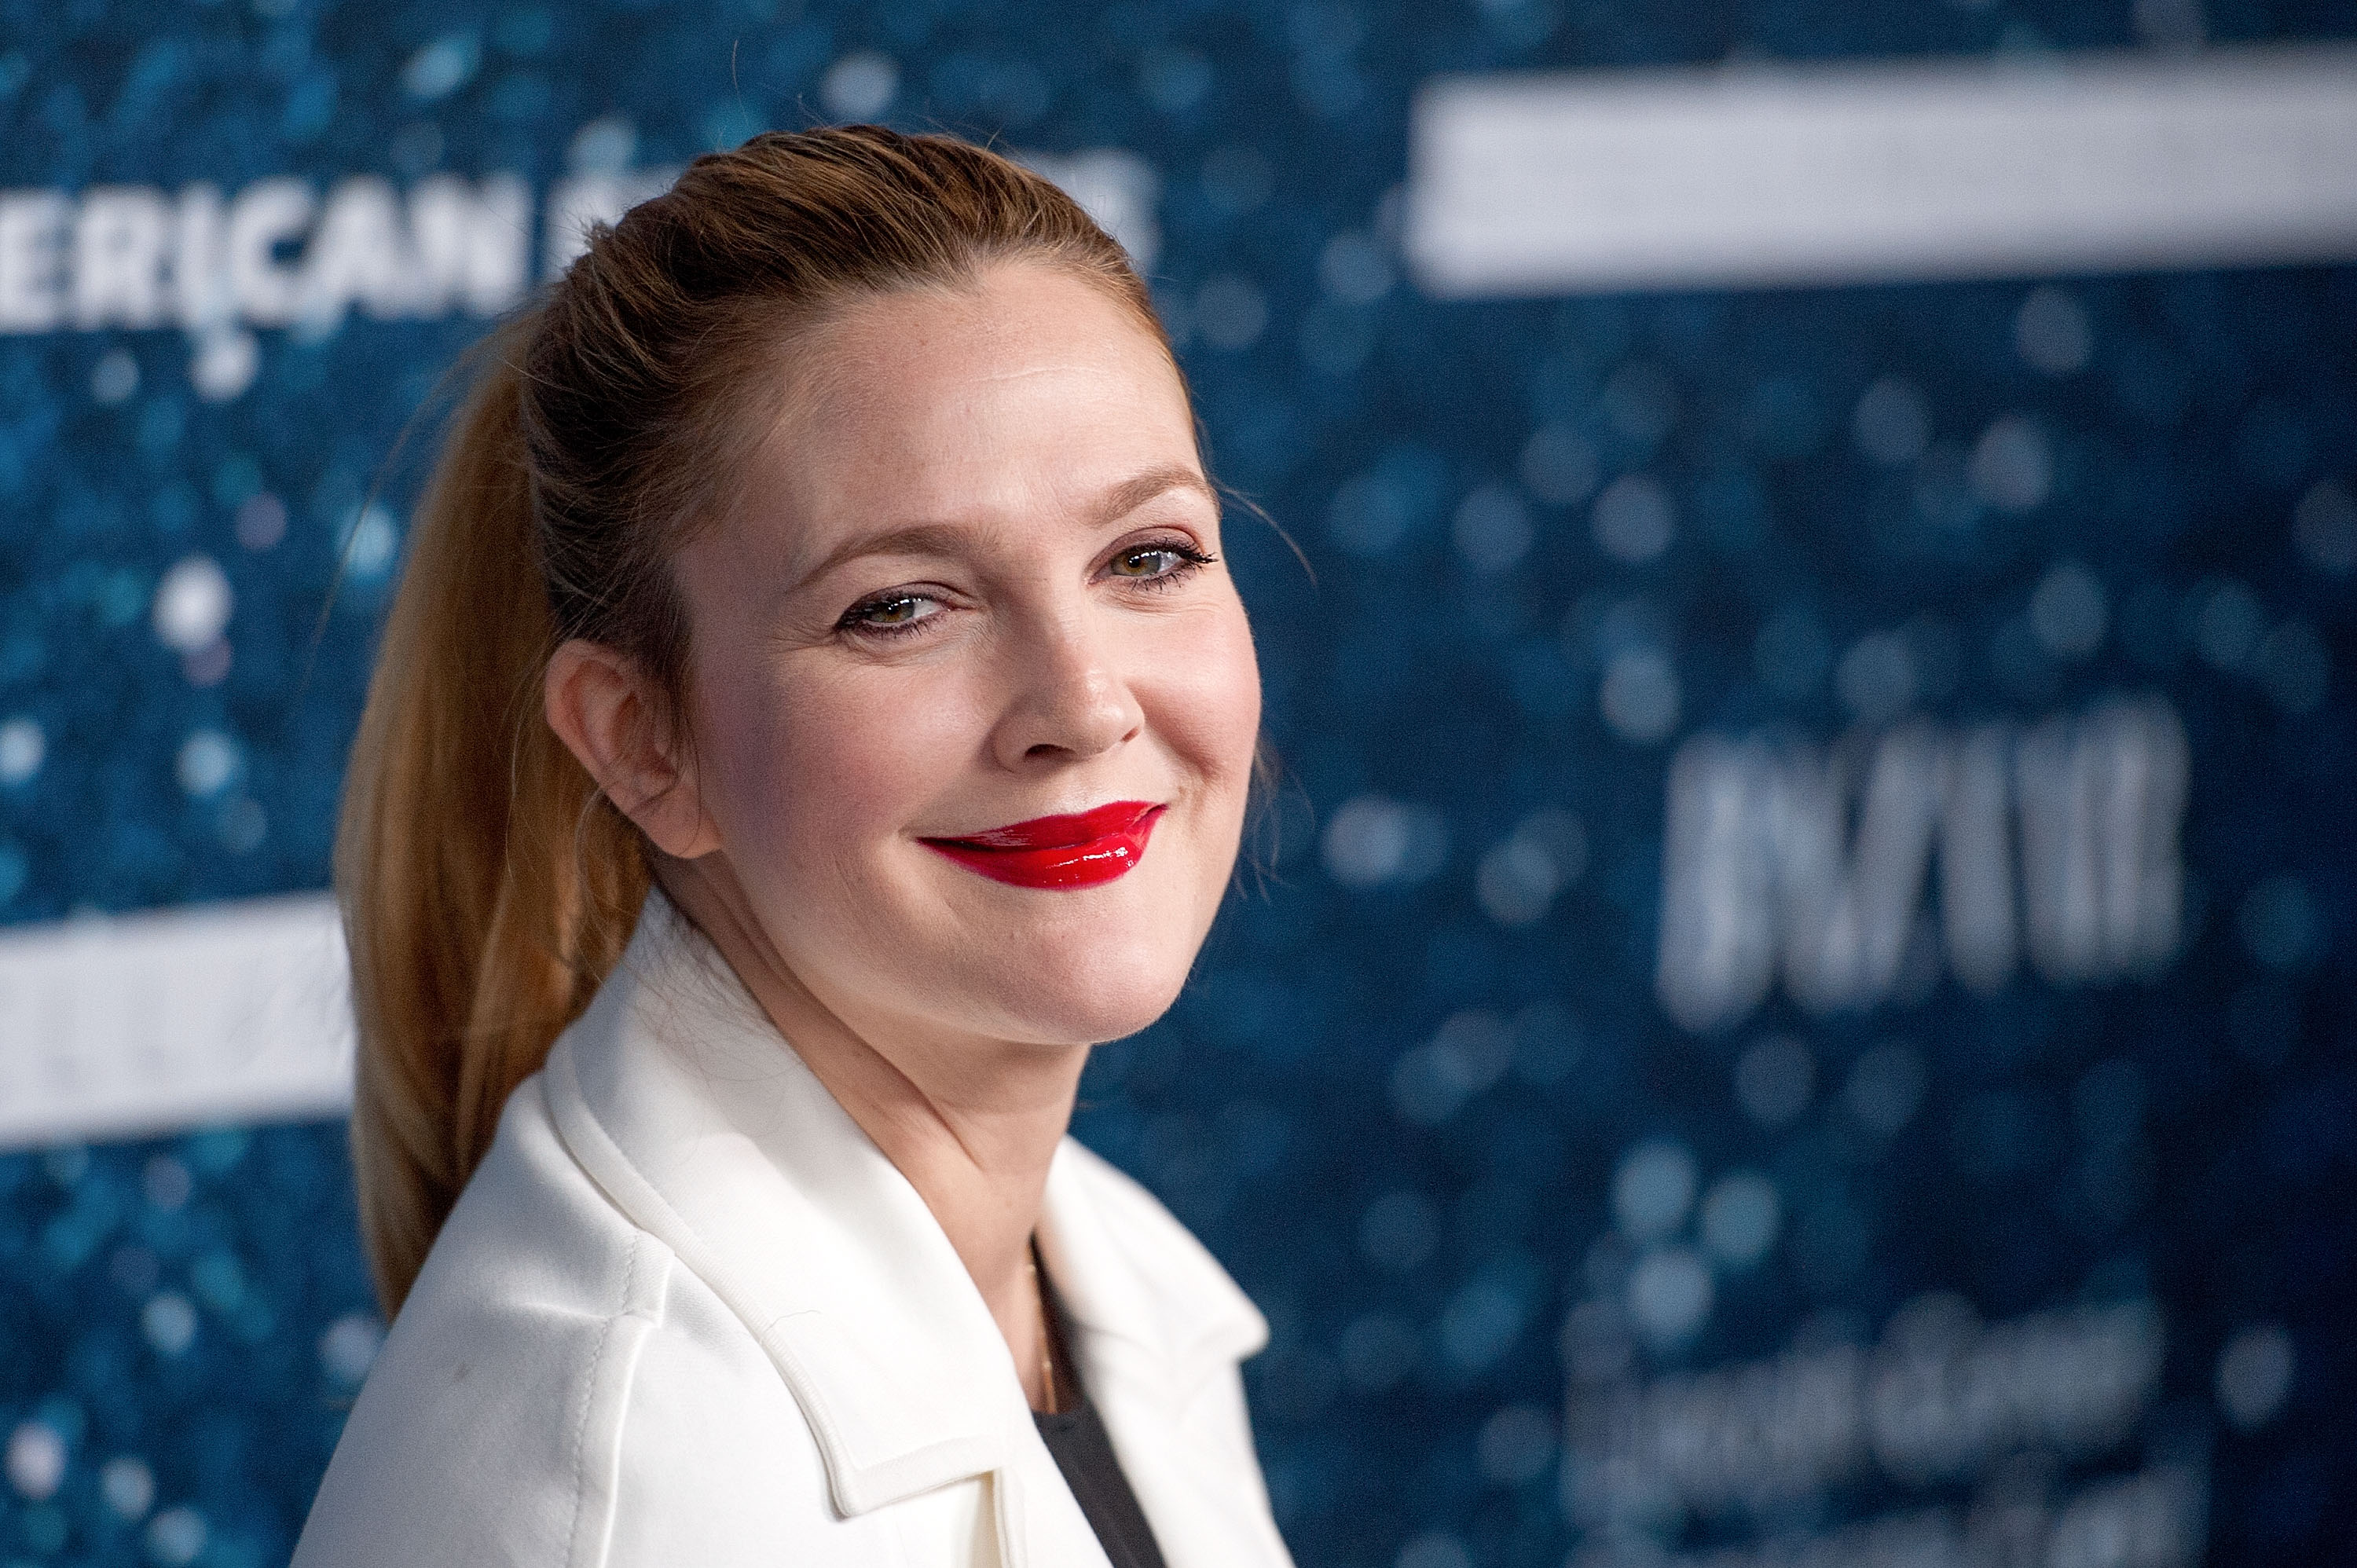 Drew Barrymore attends the 2014 Women's Leadership Award Honoring Stella McCartney at Alice Tully Hall at Lincoln Center on November 13, 2014 in New York City. | Photo: GettyImages